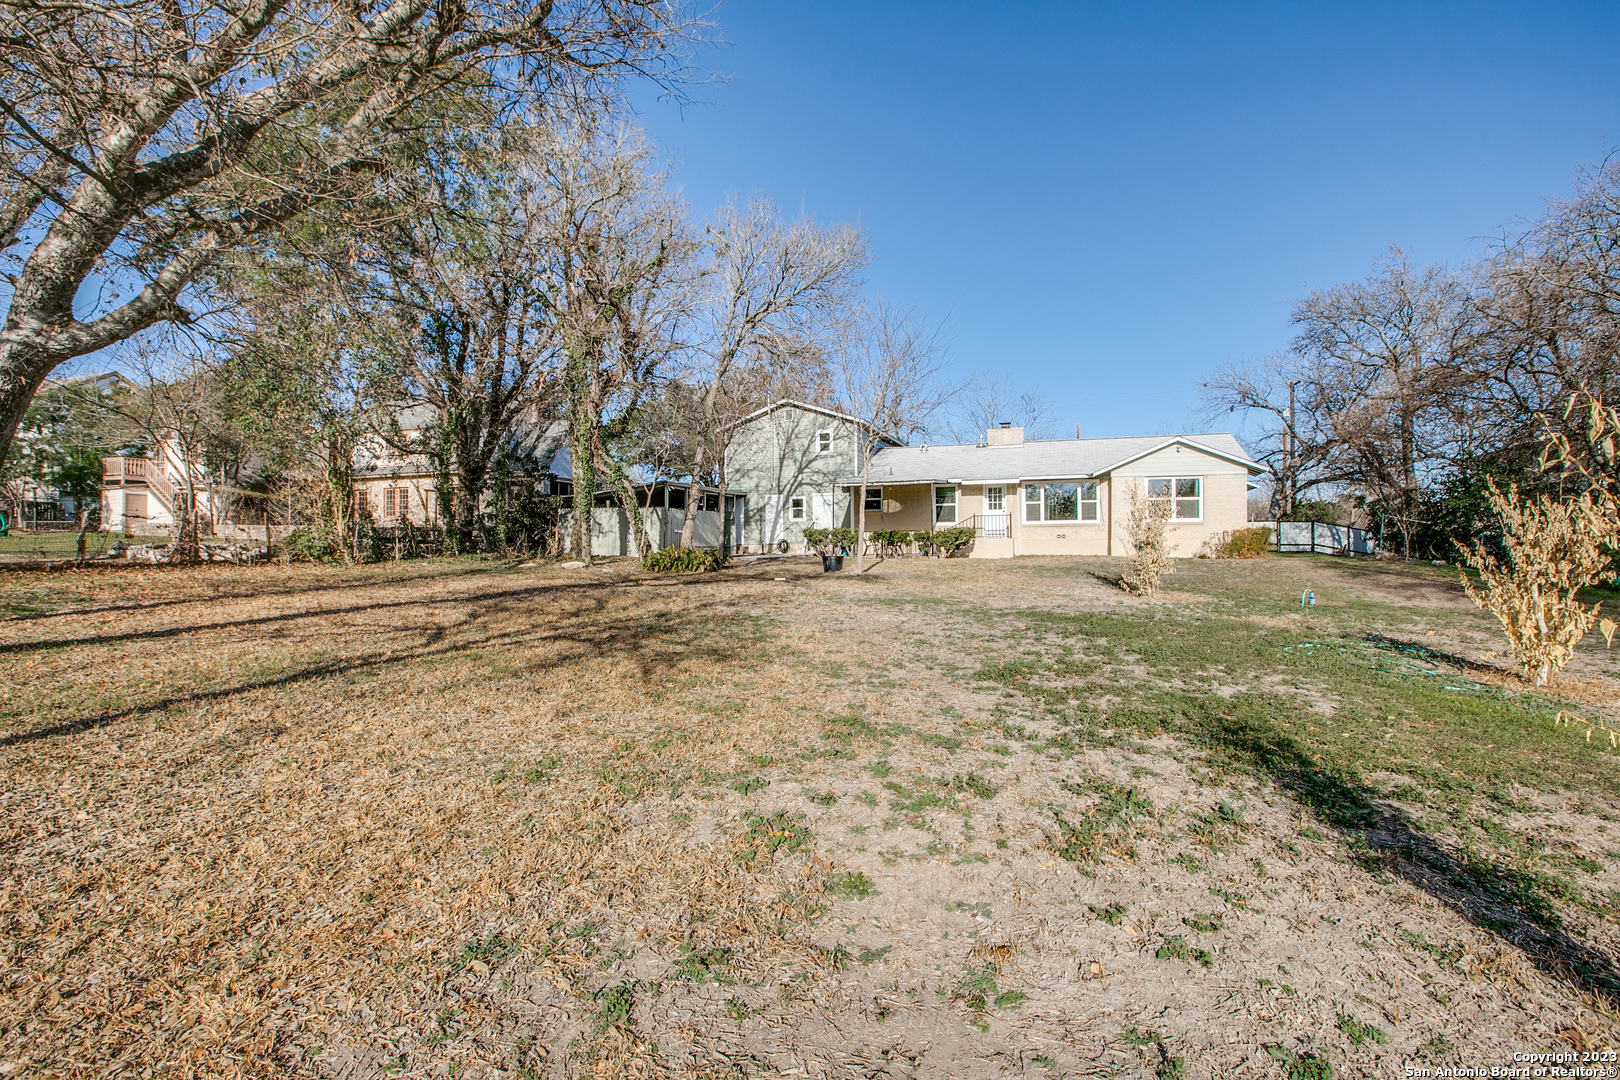 This home has the best of all worlds- HUGE YARD (approx .773 acre lot), REMODELED MODERN AMENITIES WITH HISTORIC CHARM, and just a short drive away from everything you could need. Be the second owner of this meticulously maintained and extraordinarily loved home.